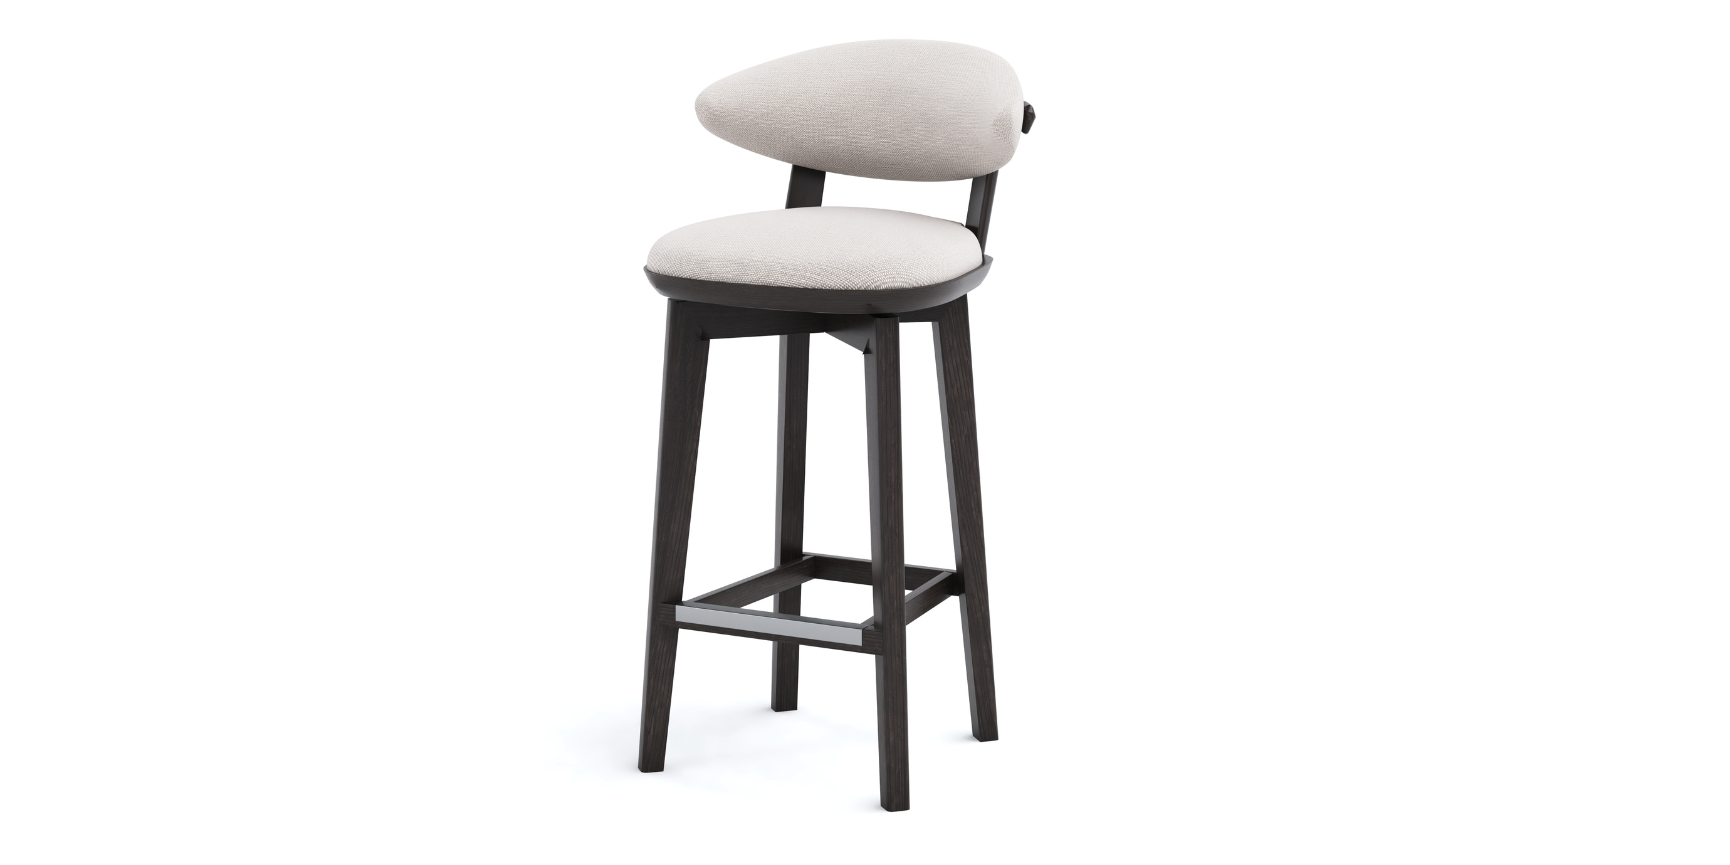 Coronet Bar Stool – Upholstered Back in Outdoor Bar Stools for Coronet collection